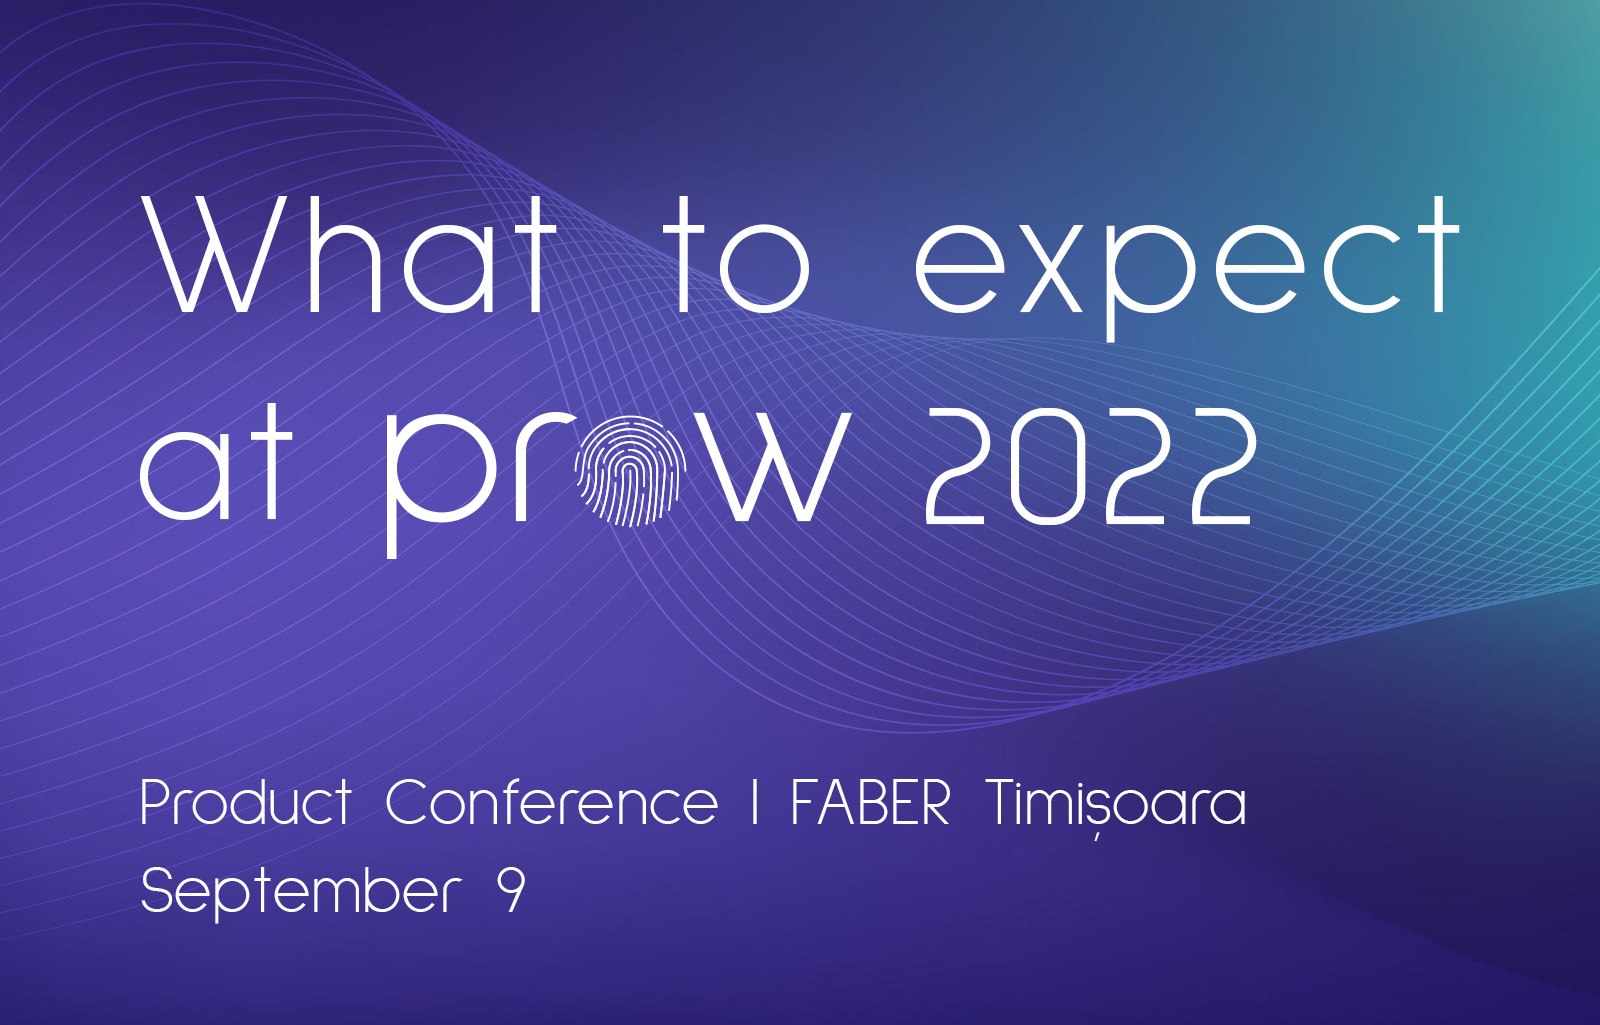 What to expect at Prow 2022